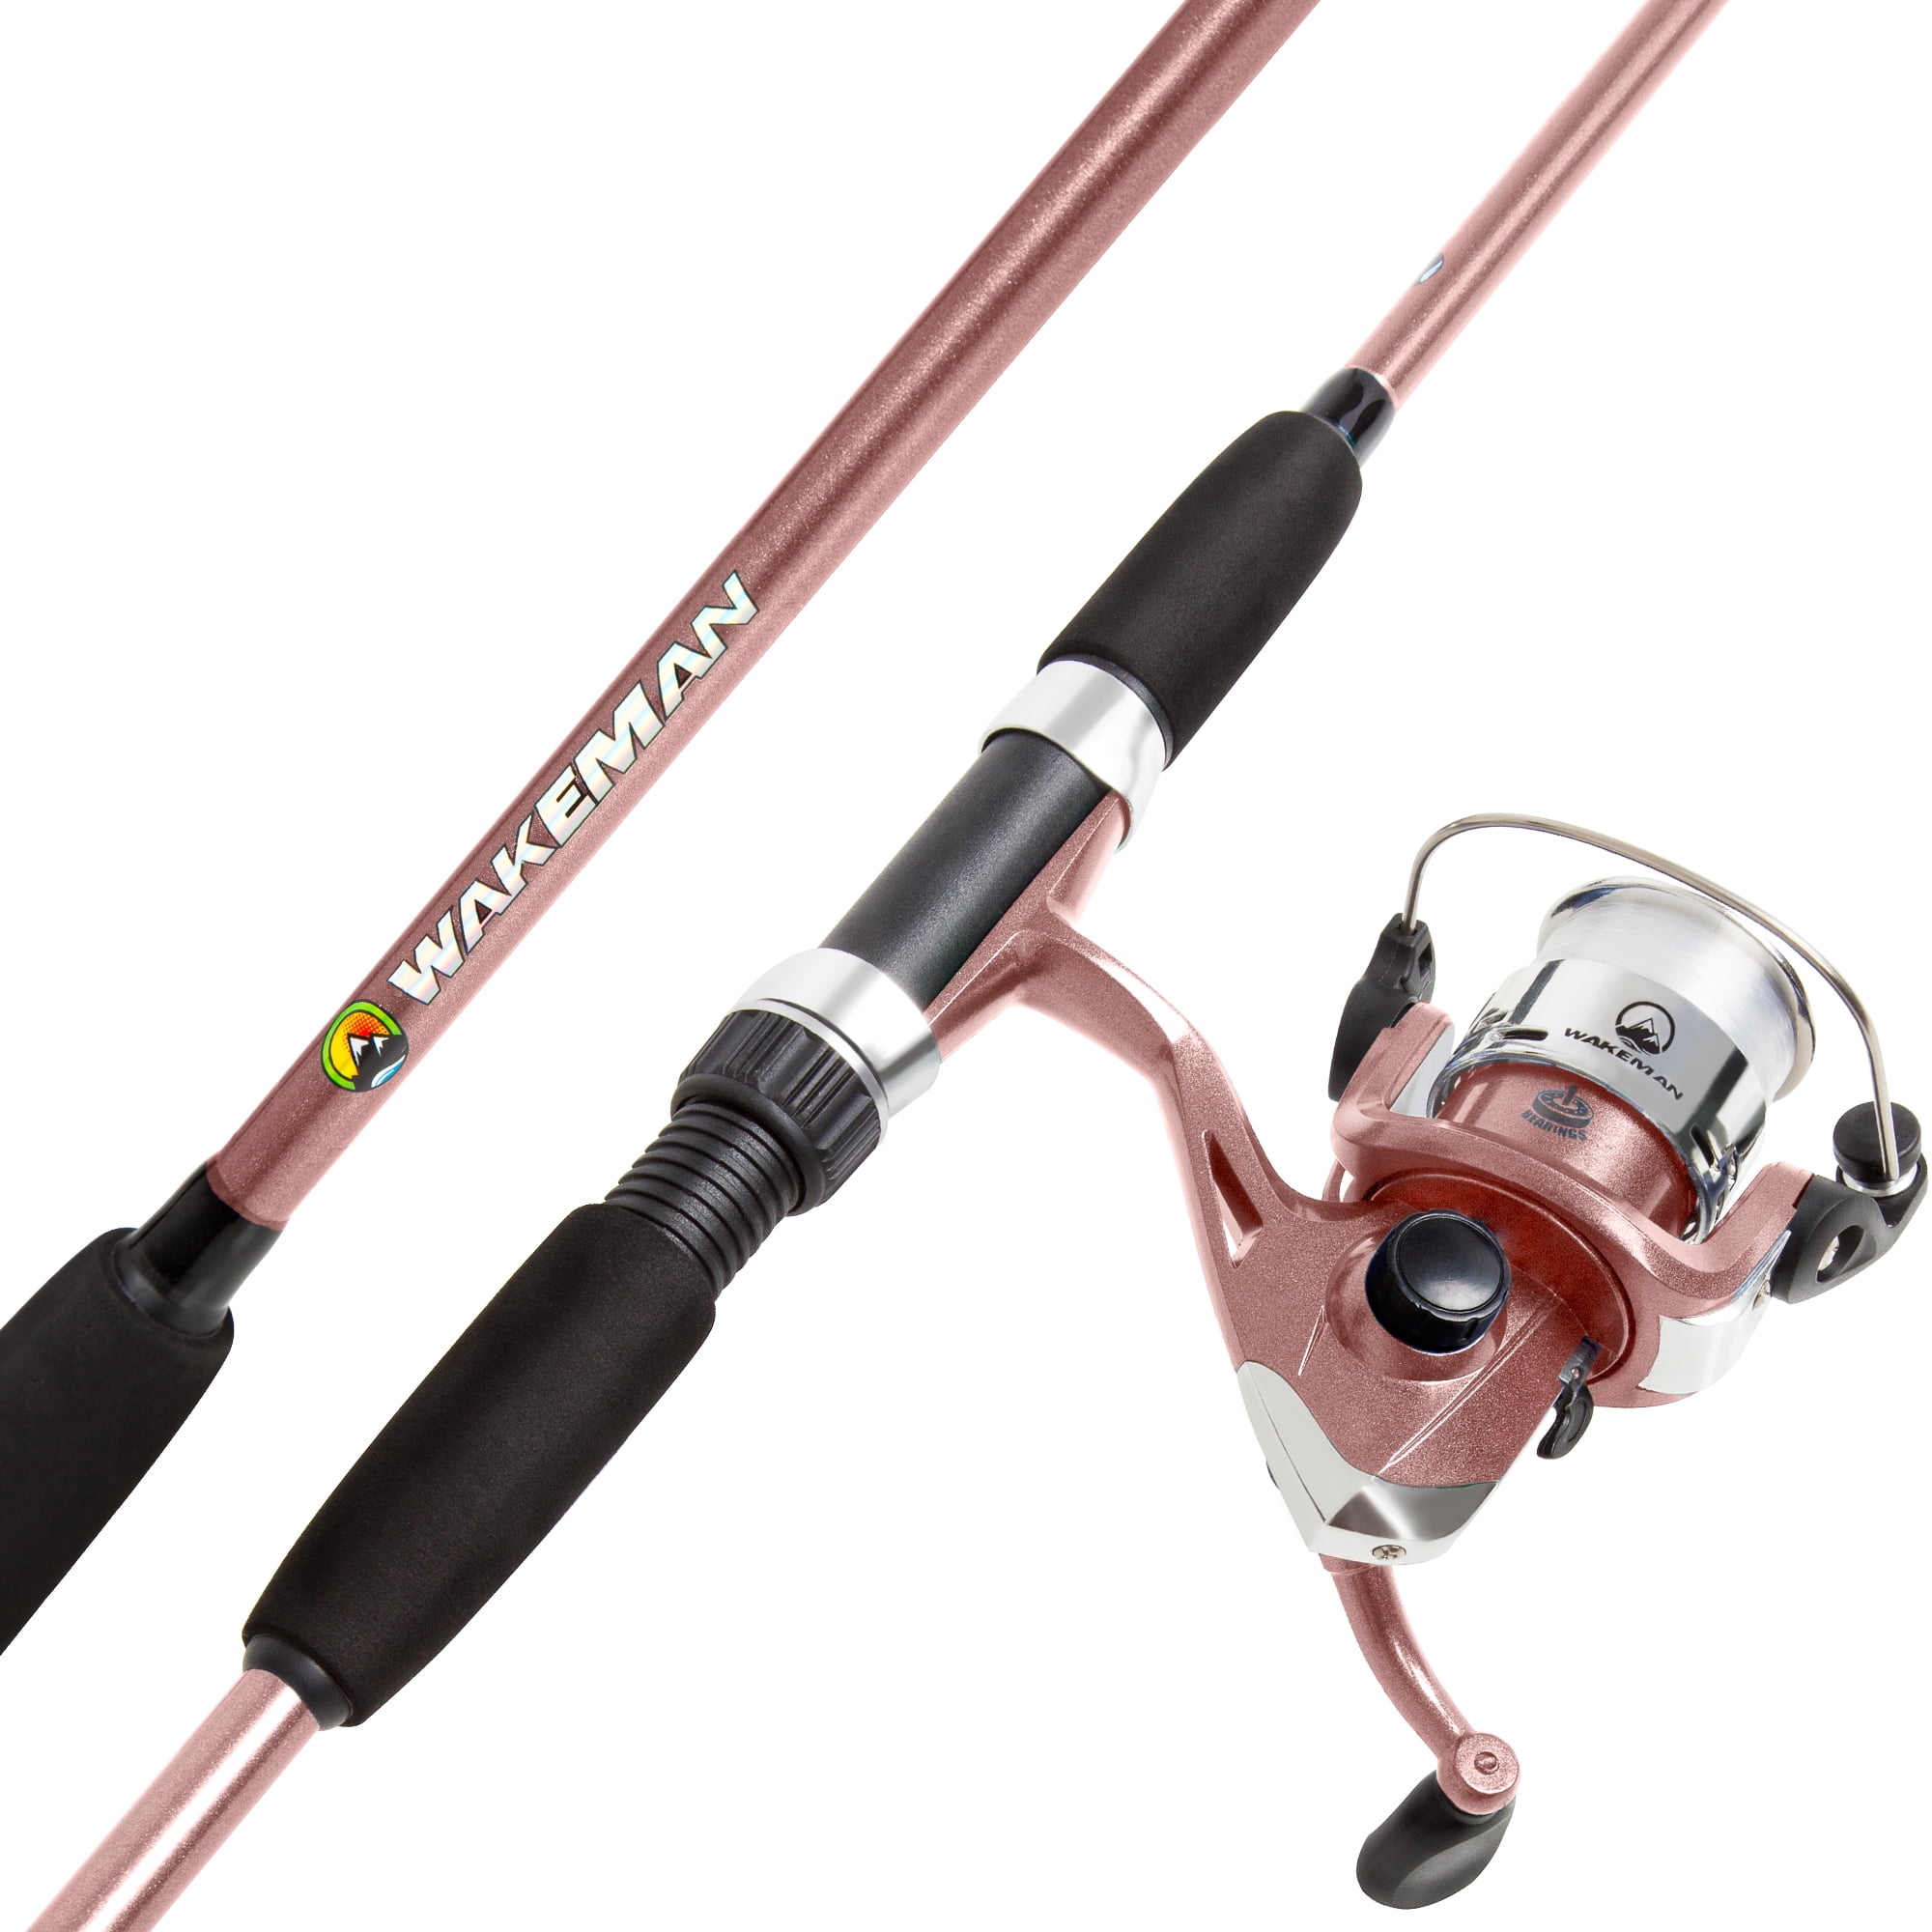 Wakeman Emerald Green 65 Spinning Rod and Reel Combo 